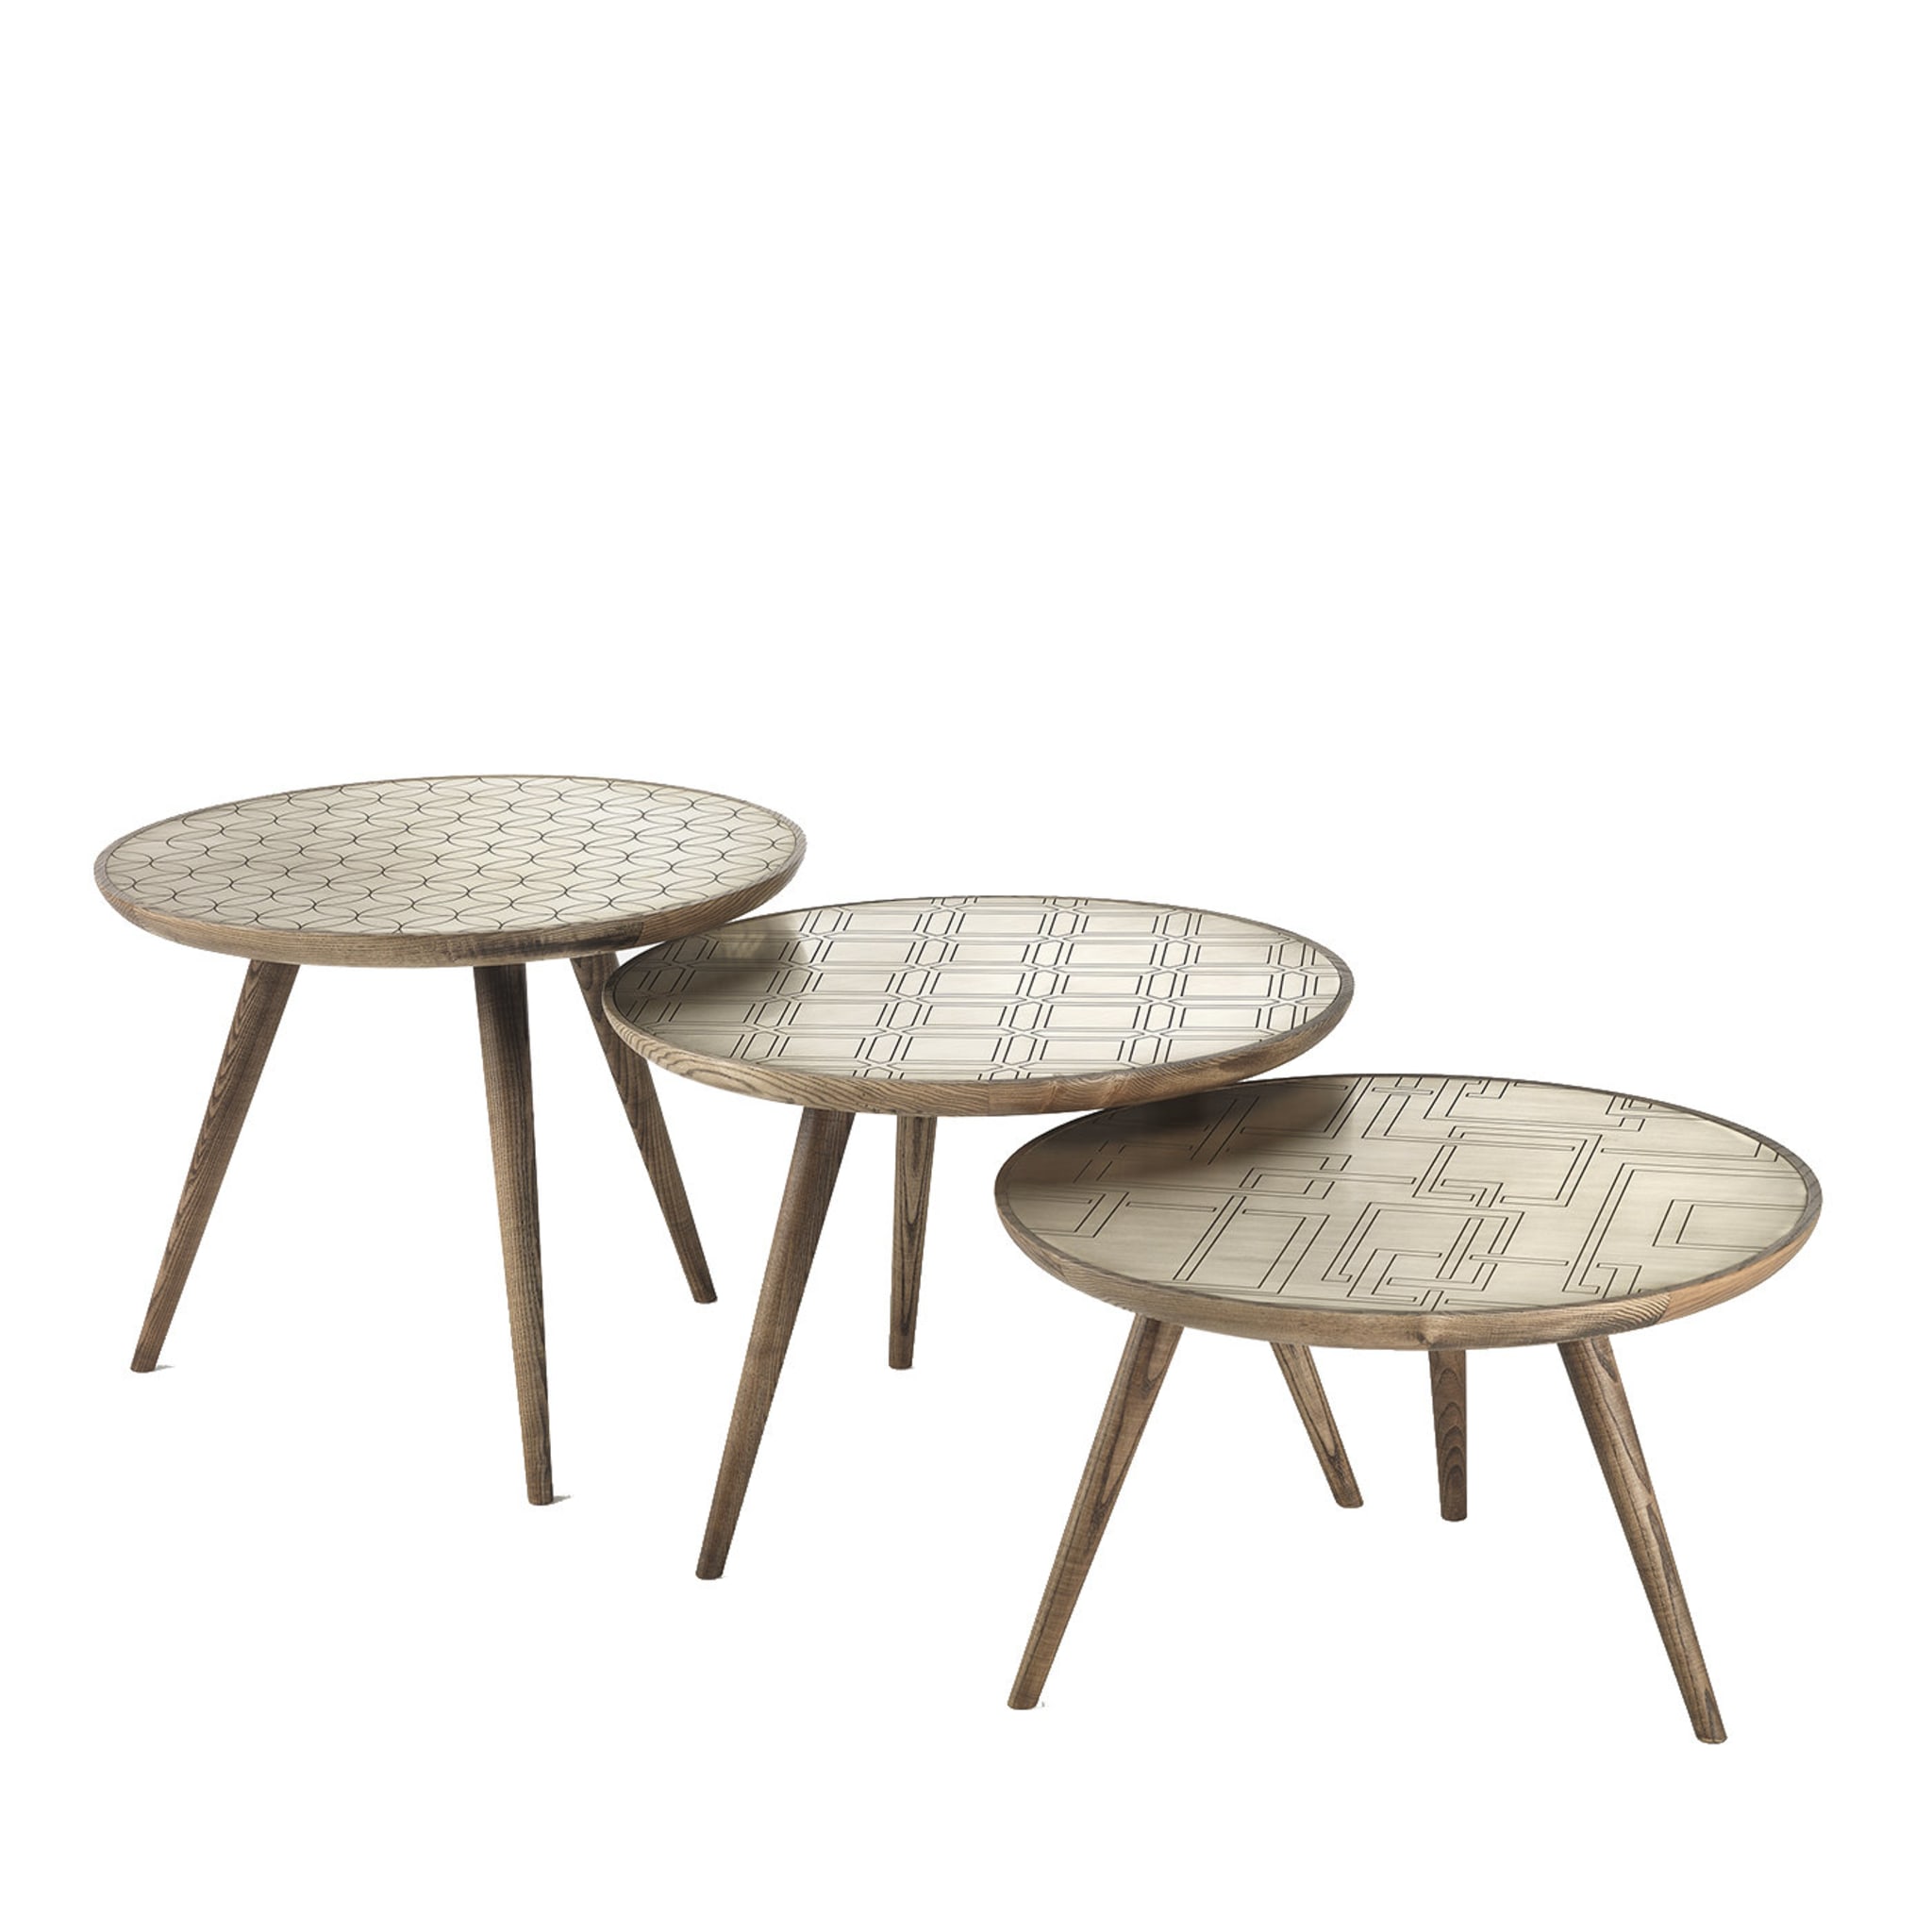 Set of 3 Brass Nesting Tables - Main view